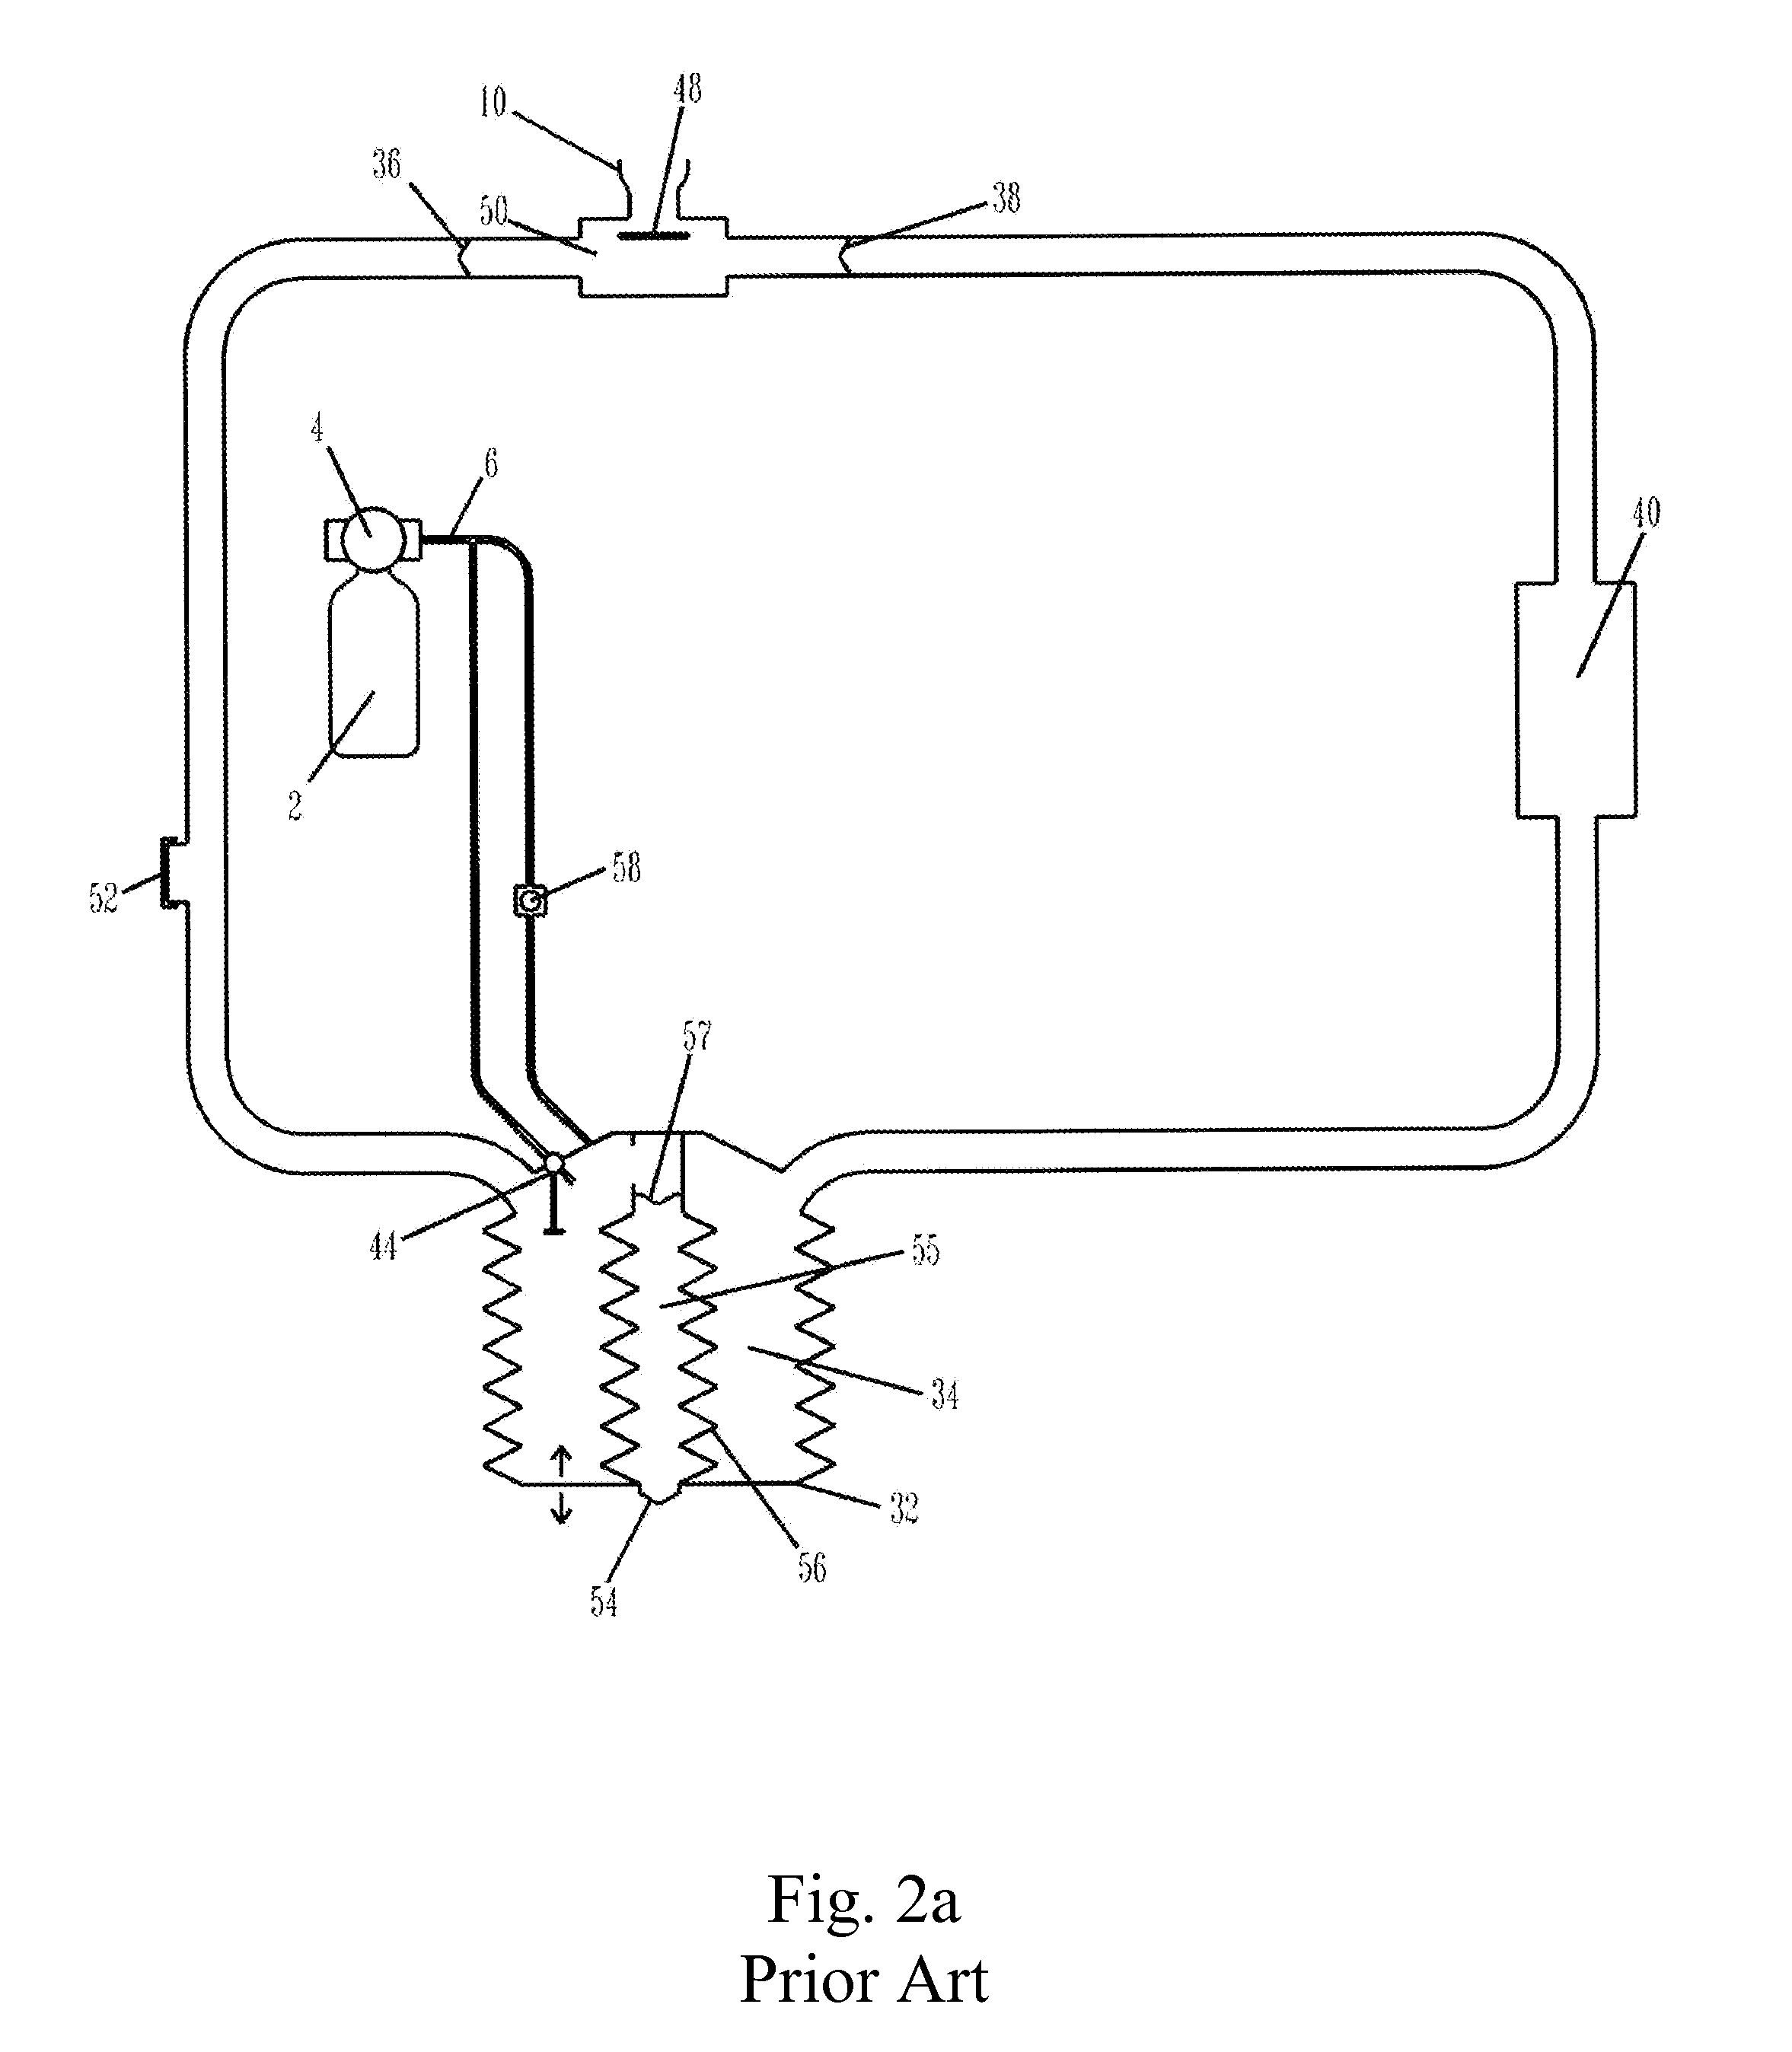 Gas assisted re-breathing device